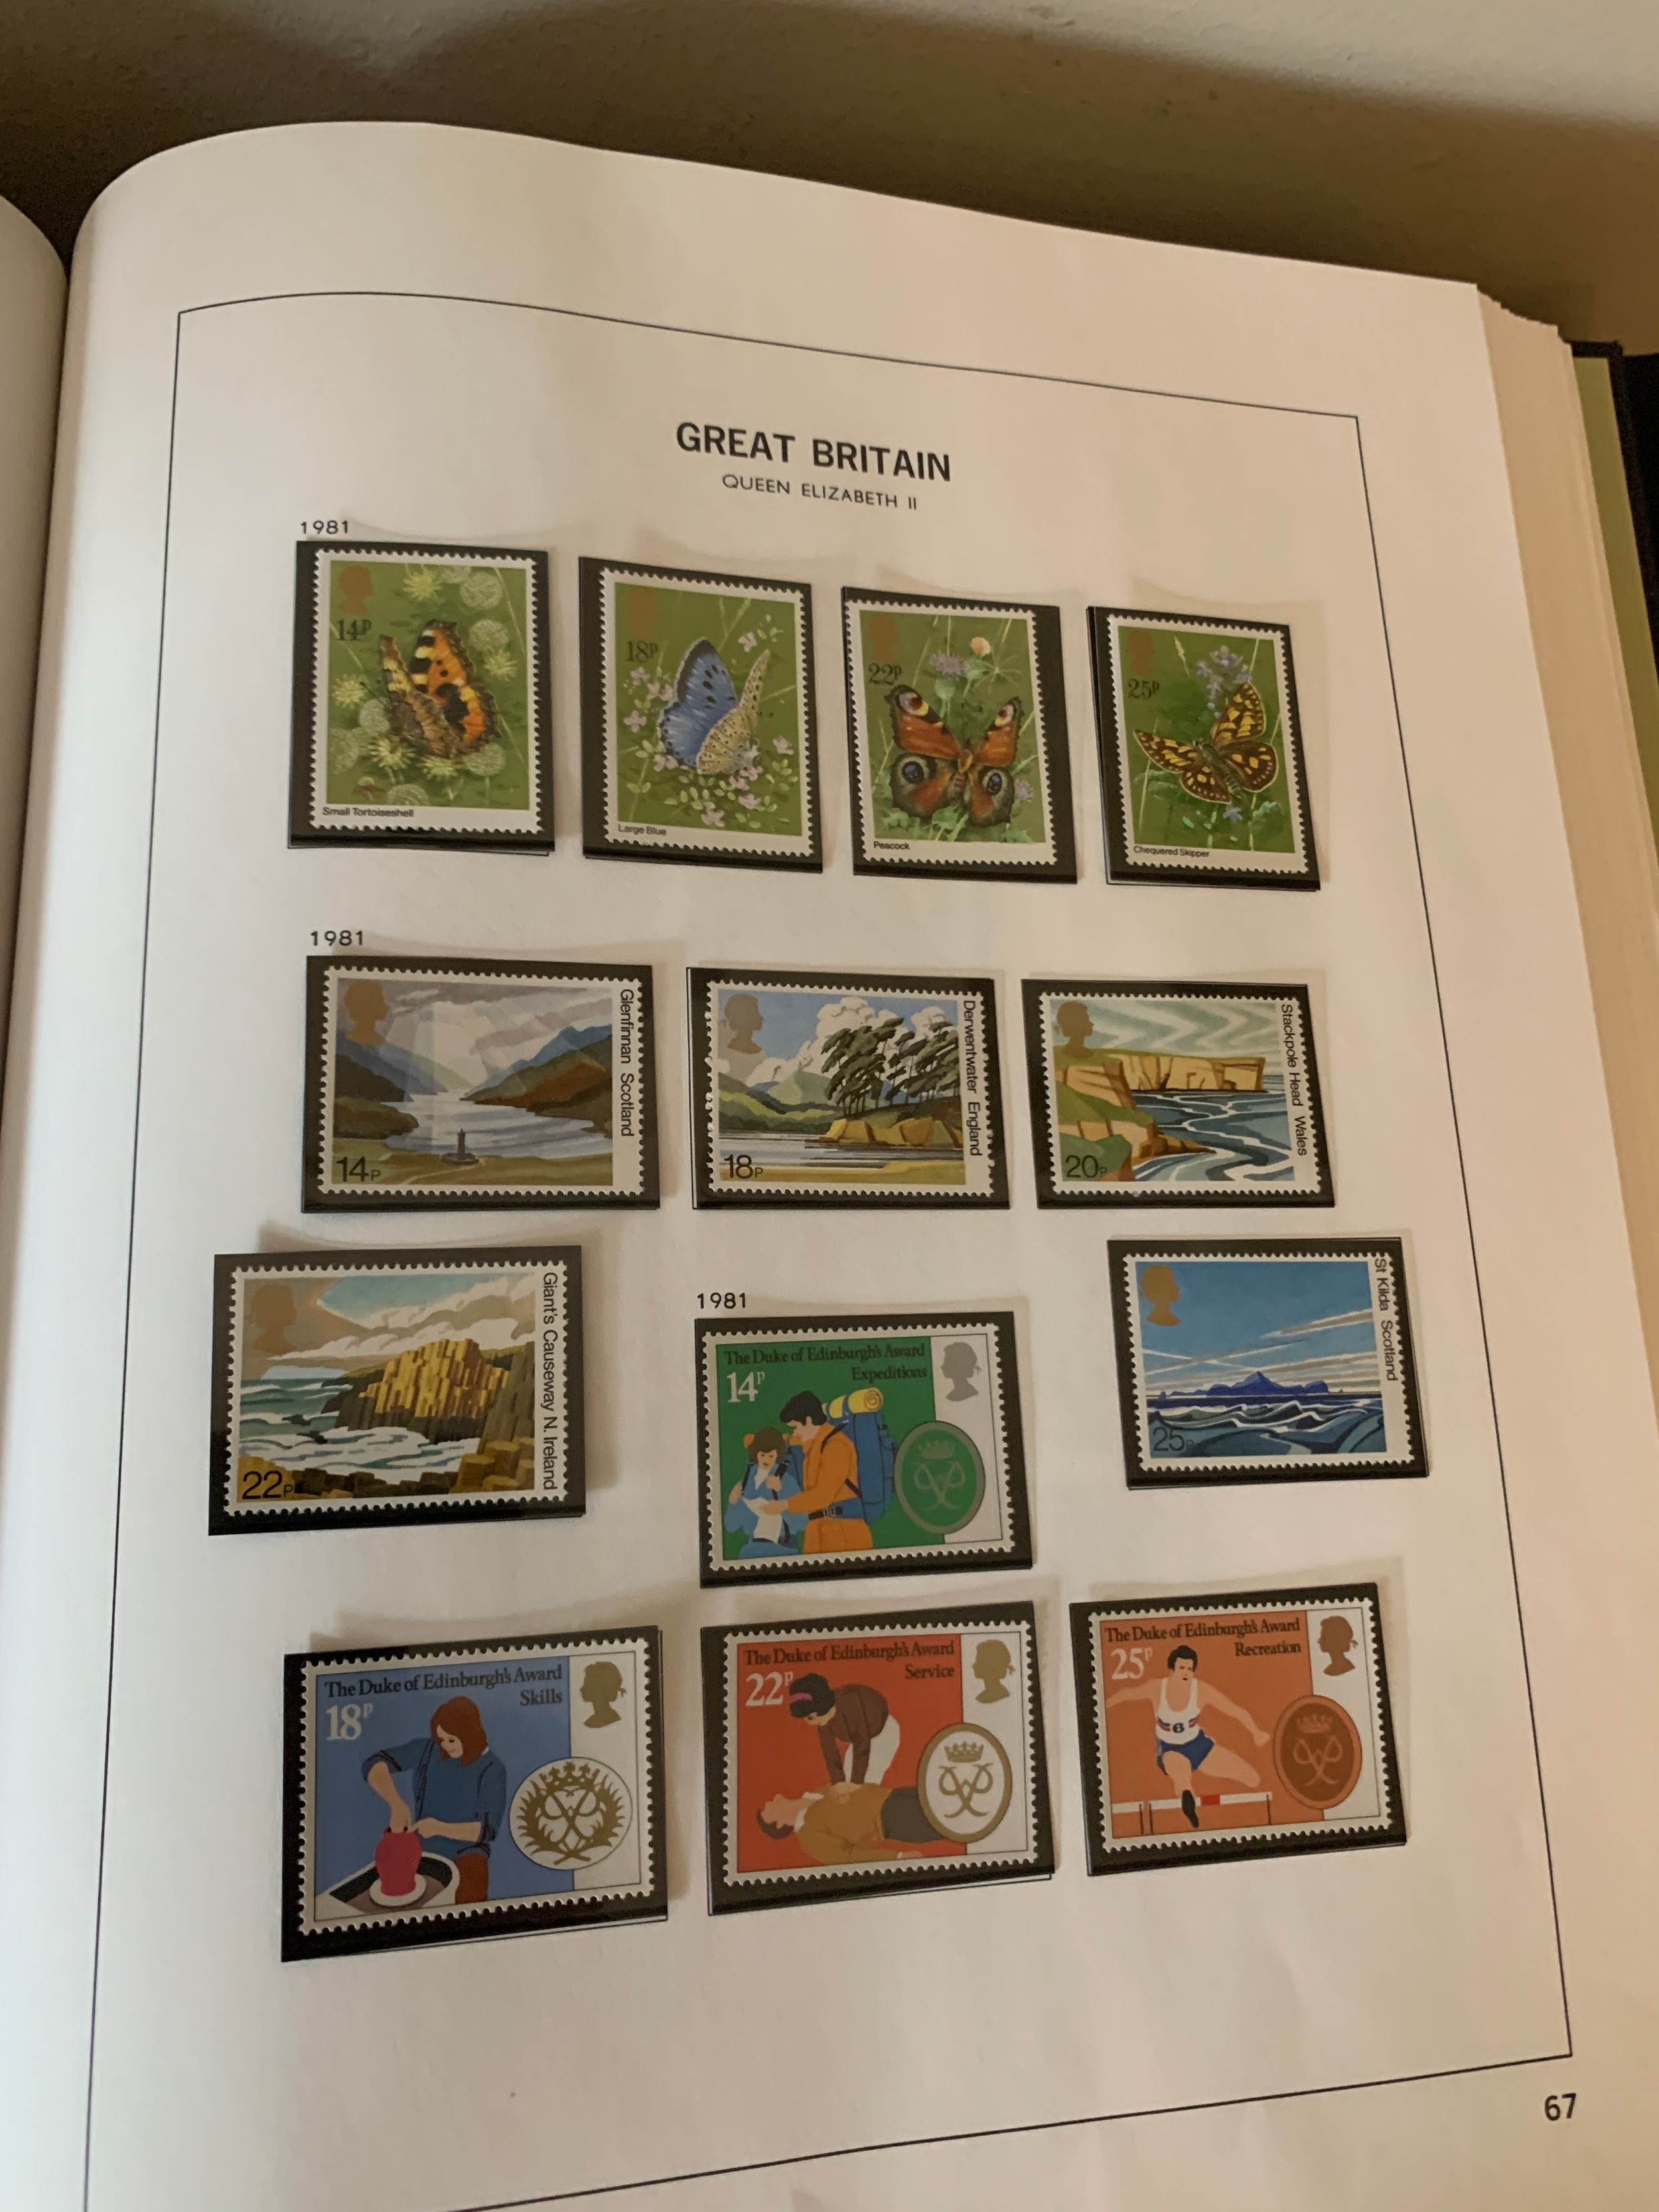 A boxed Stanley Gibbons printed stamp album of Great Britain. - Image 2 of 4